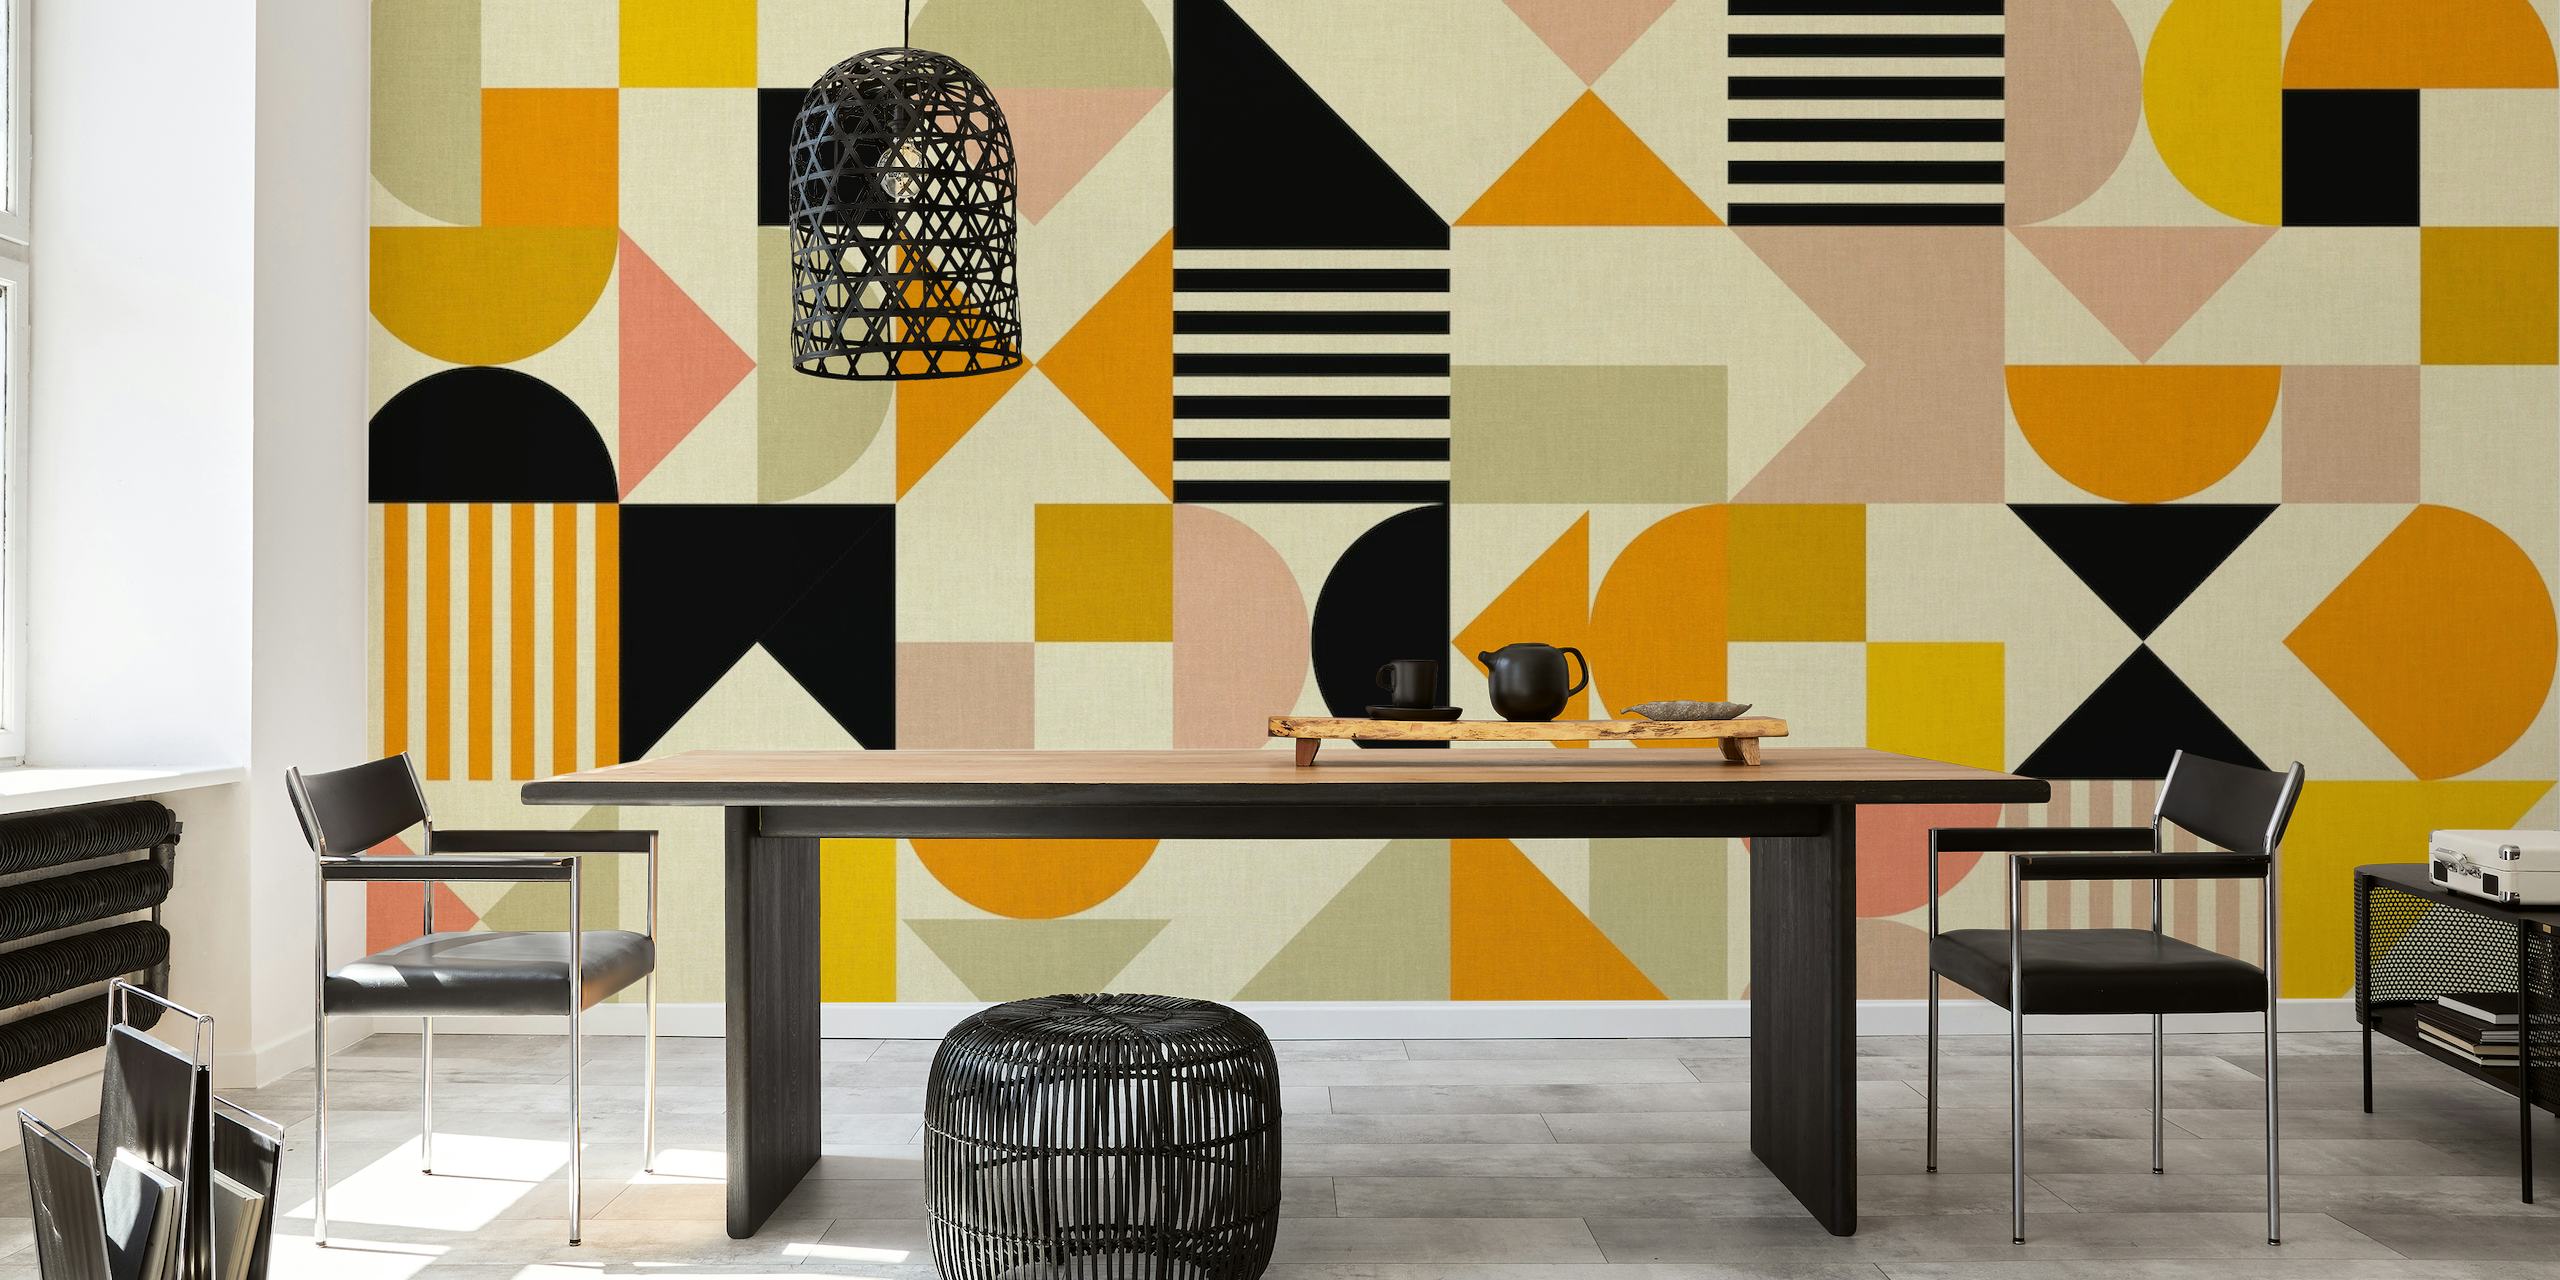 Classic Mid Century 3 wall mural with geometric shapes and mid-century colors